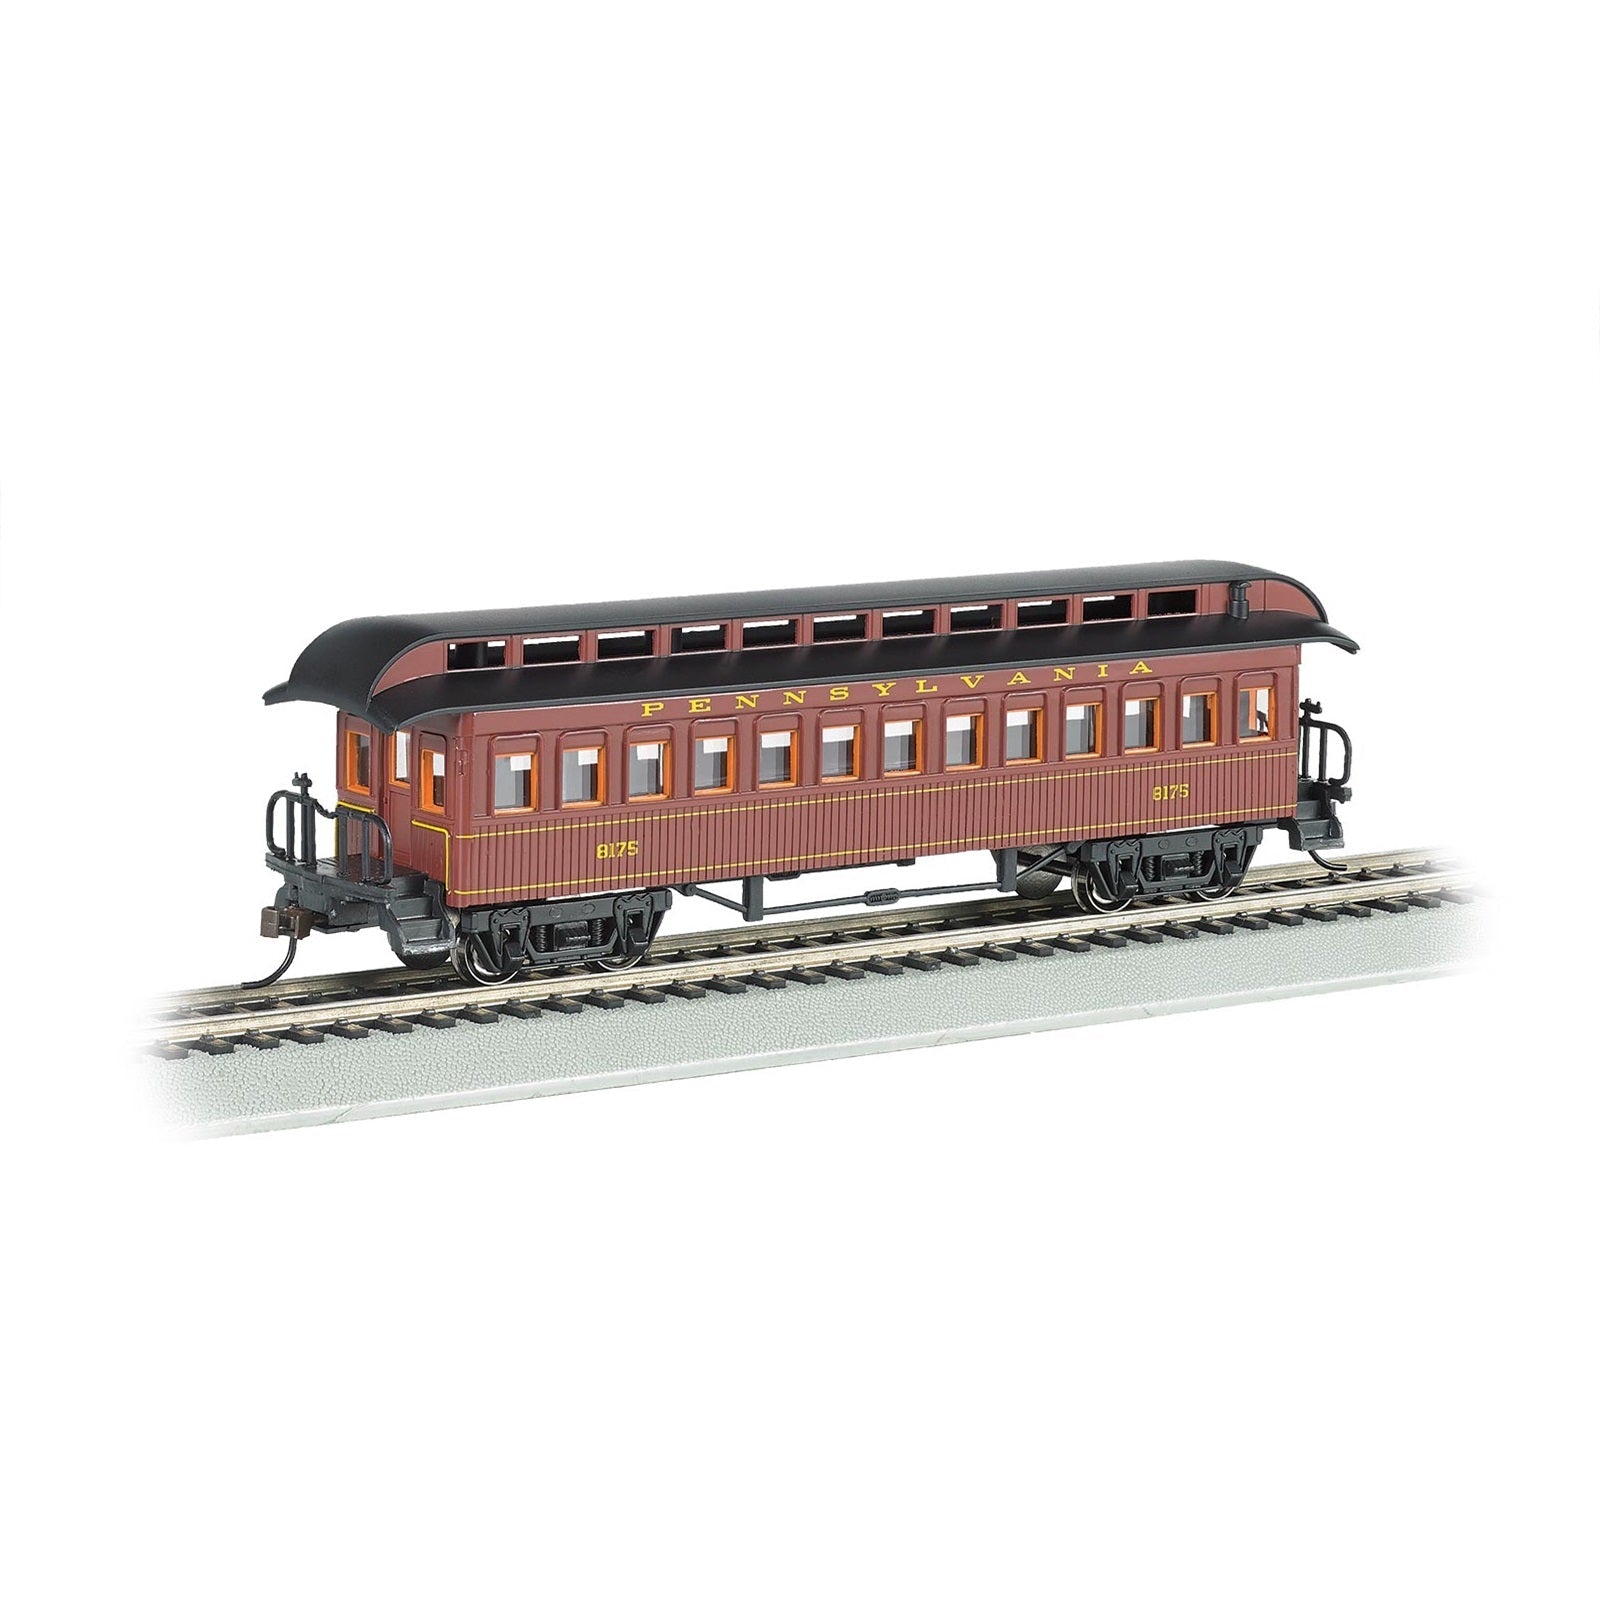 Bachmann HO Scale Old - Time Coach Car with Rounded - End Clerestory Roof, Pennsylvania Railroad